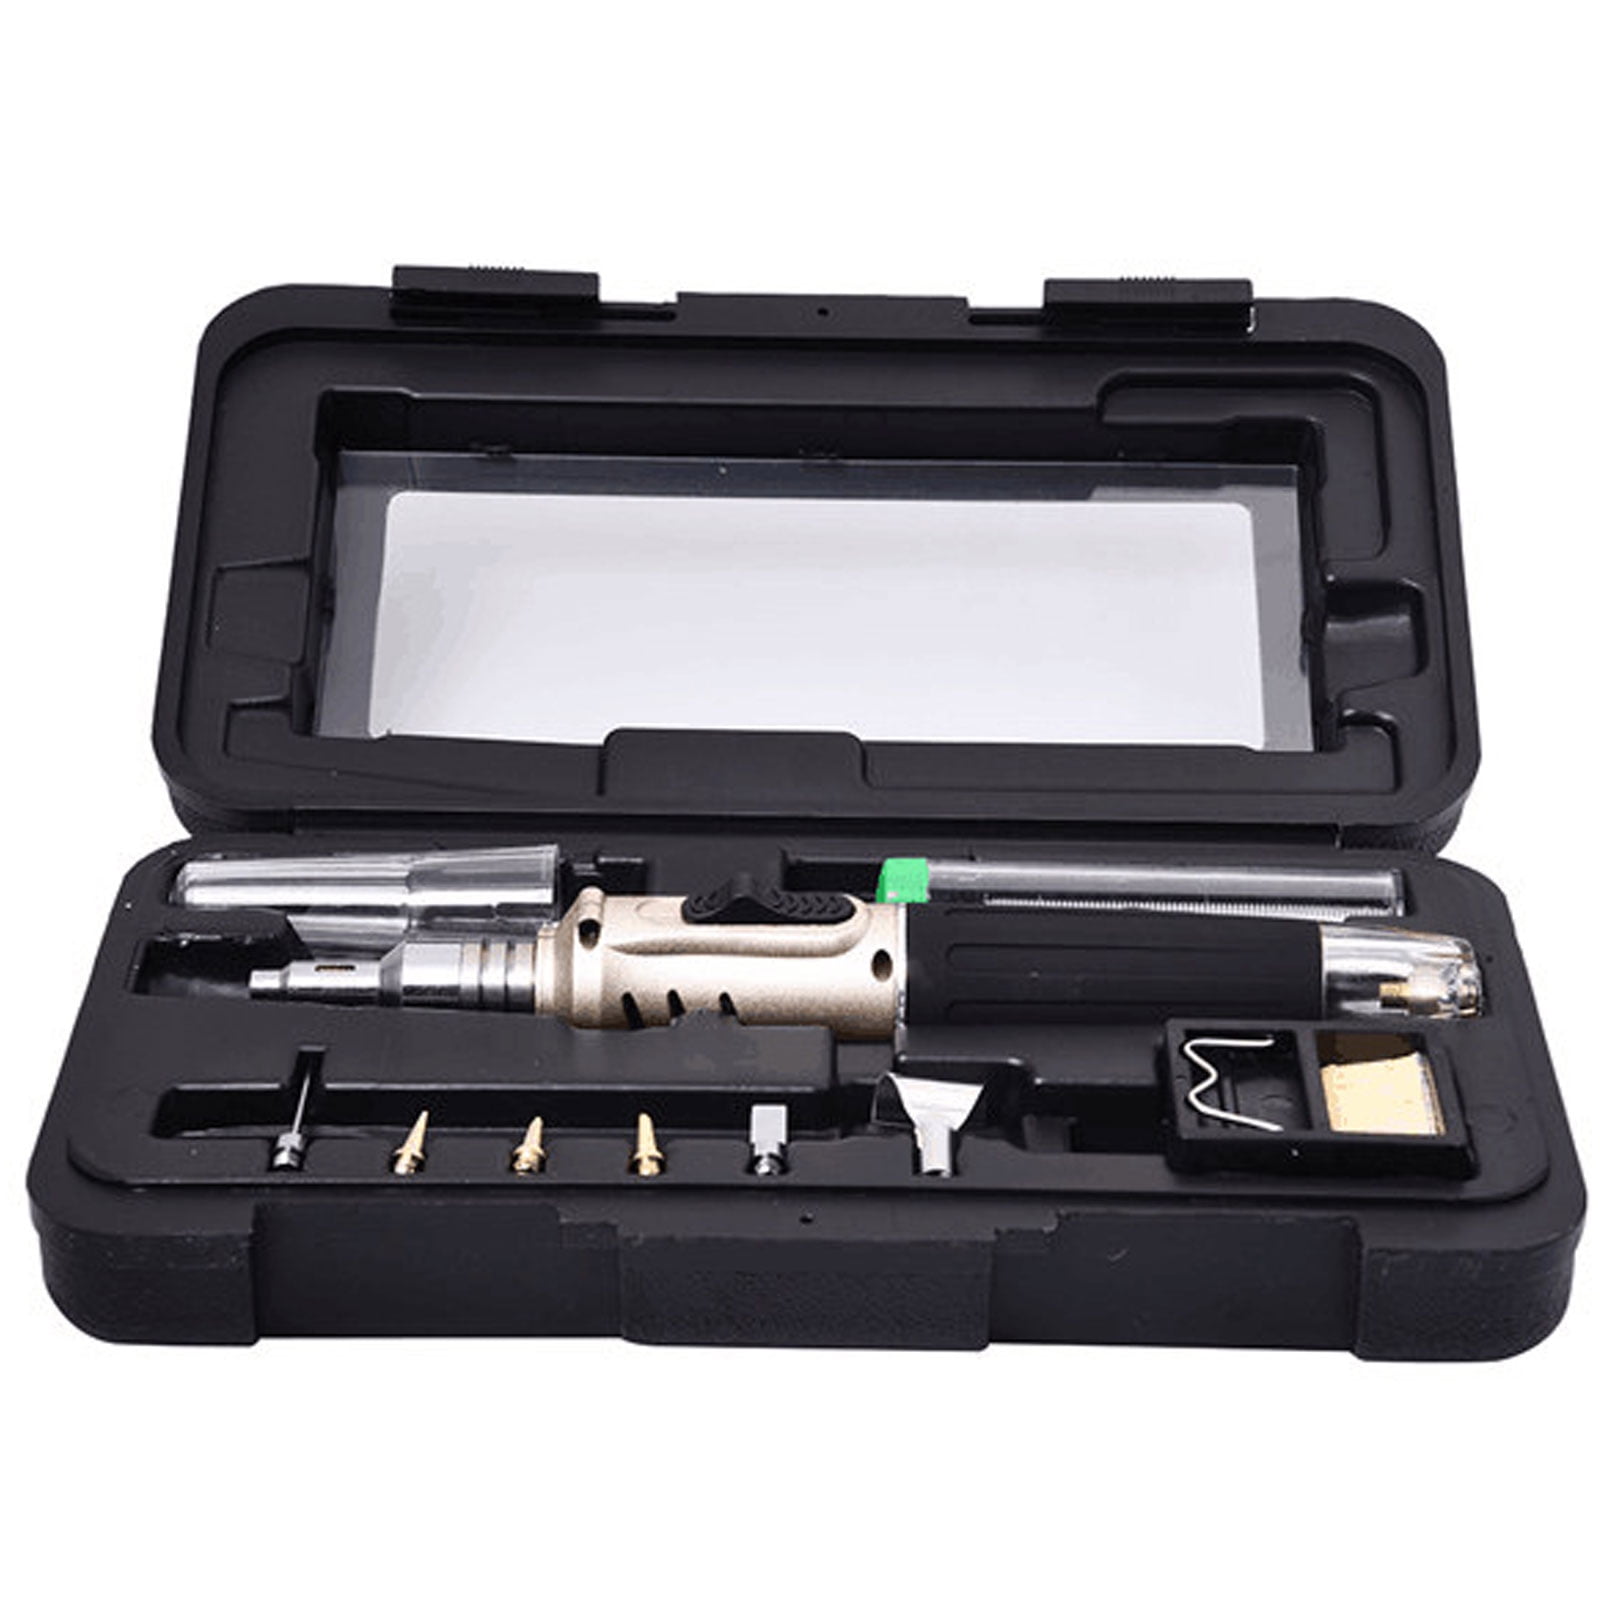 Auto Ignition Soldering Iron Kit Professional Gas Butane Torch With Plastic Case 